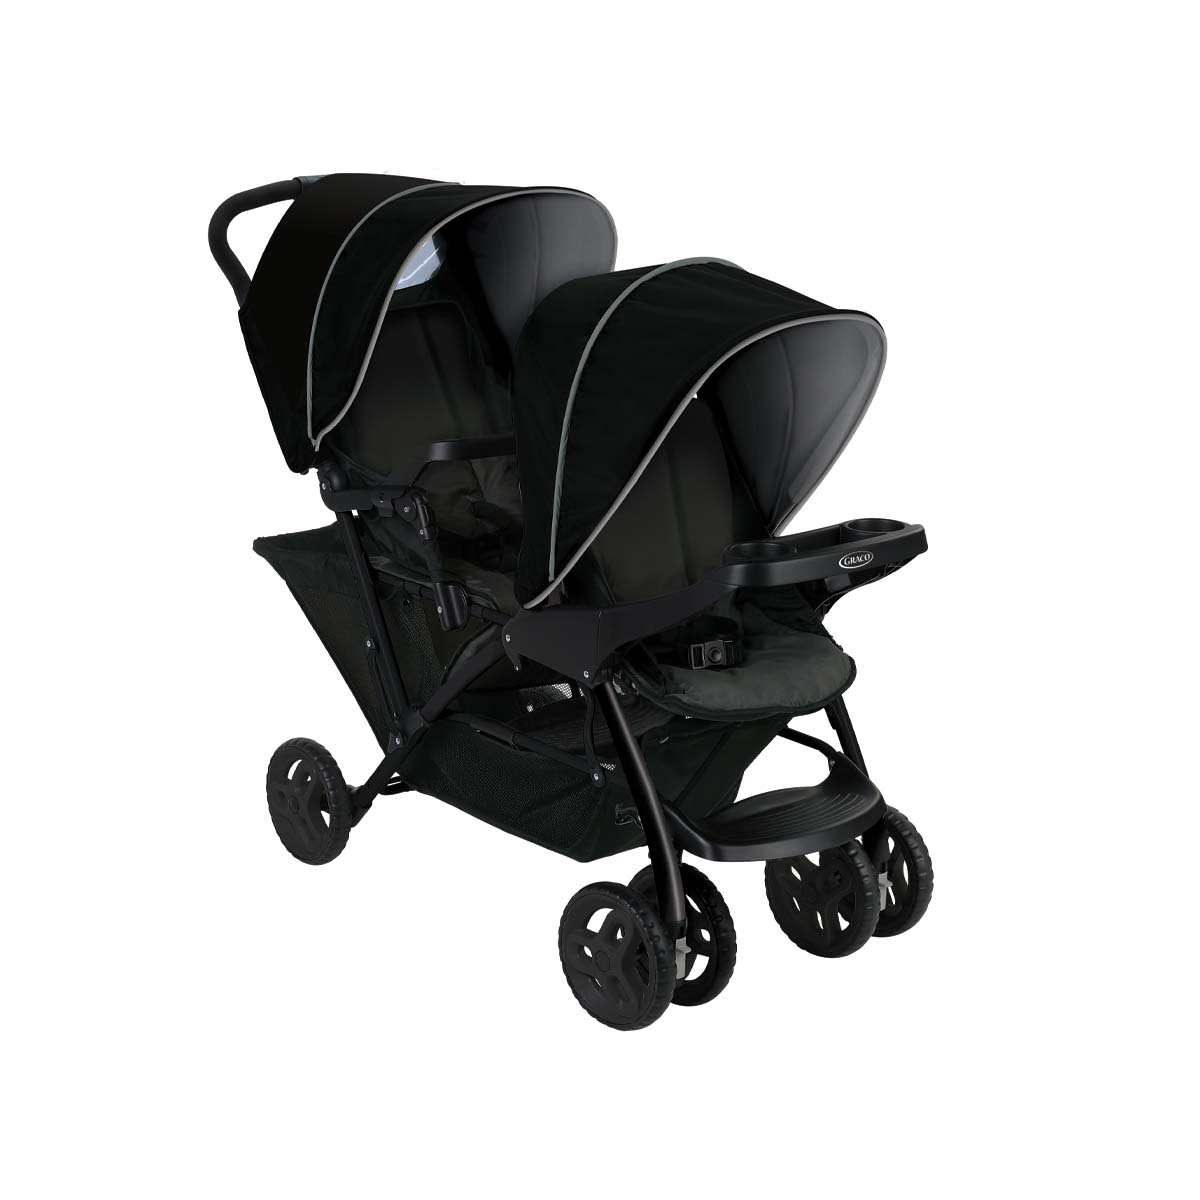 GRACO STADIUM DUO TANDEM STROLLER - BLACK/GREY -  | For Your Little One